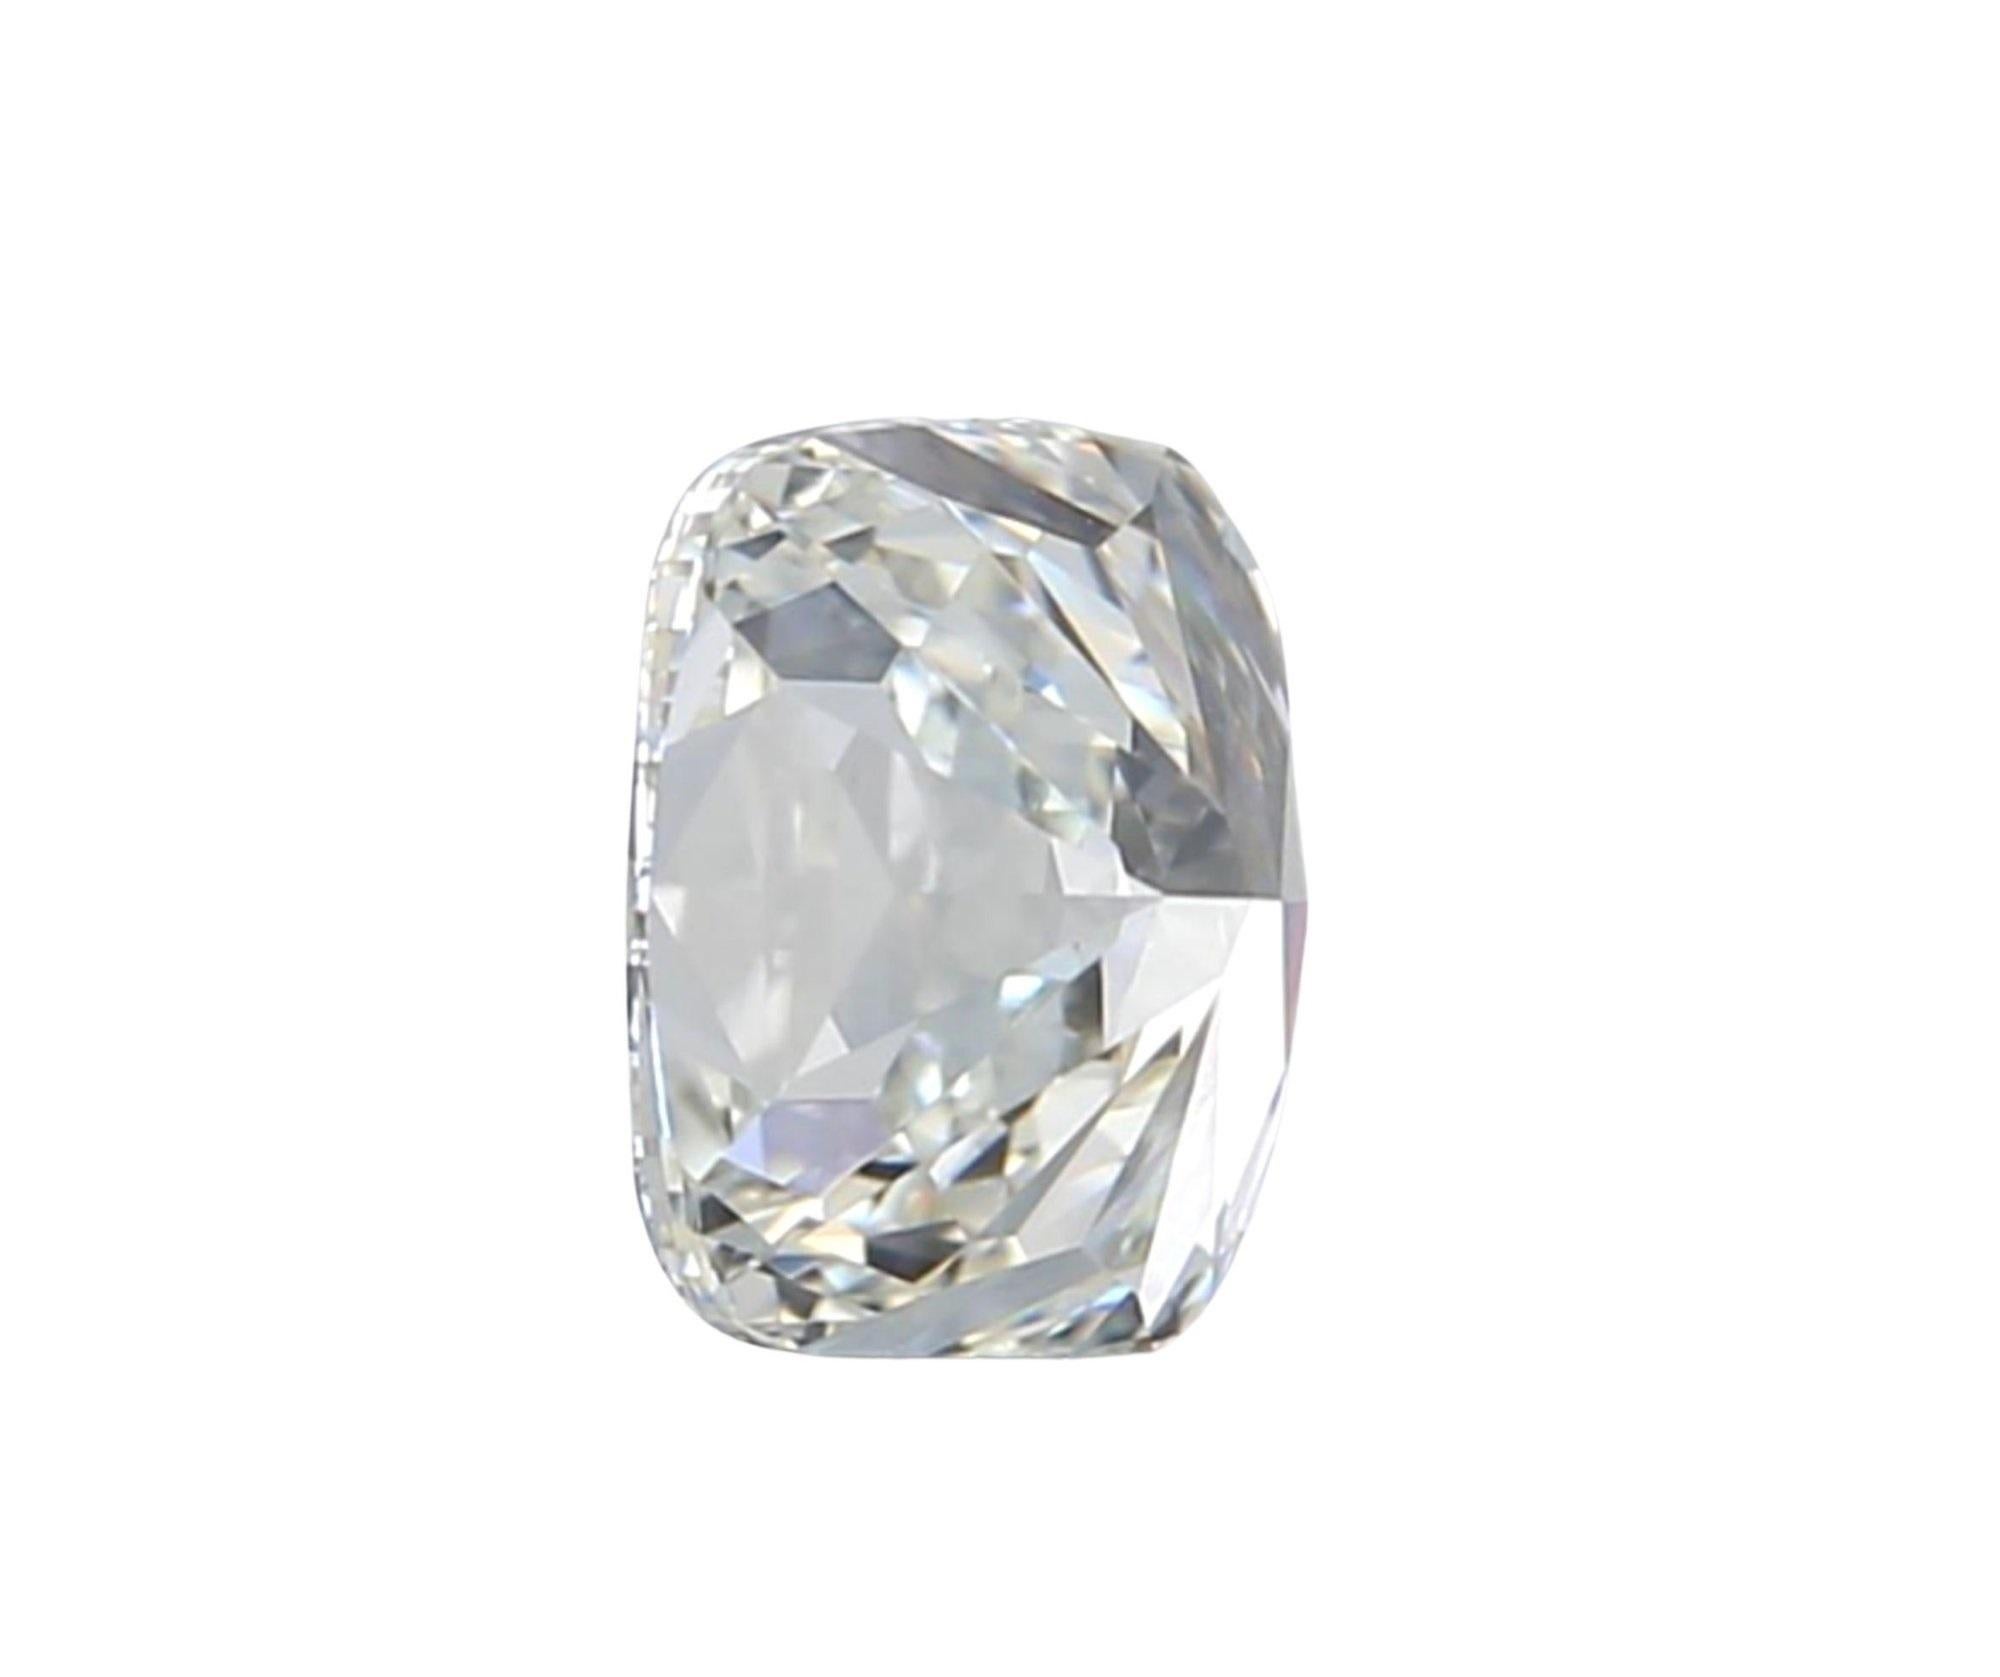 Natural Cushion Diamond in a 1.01 Carat H IF- IGI Certificate For Sale 1